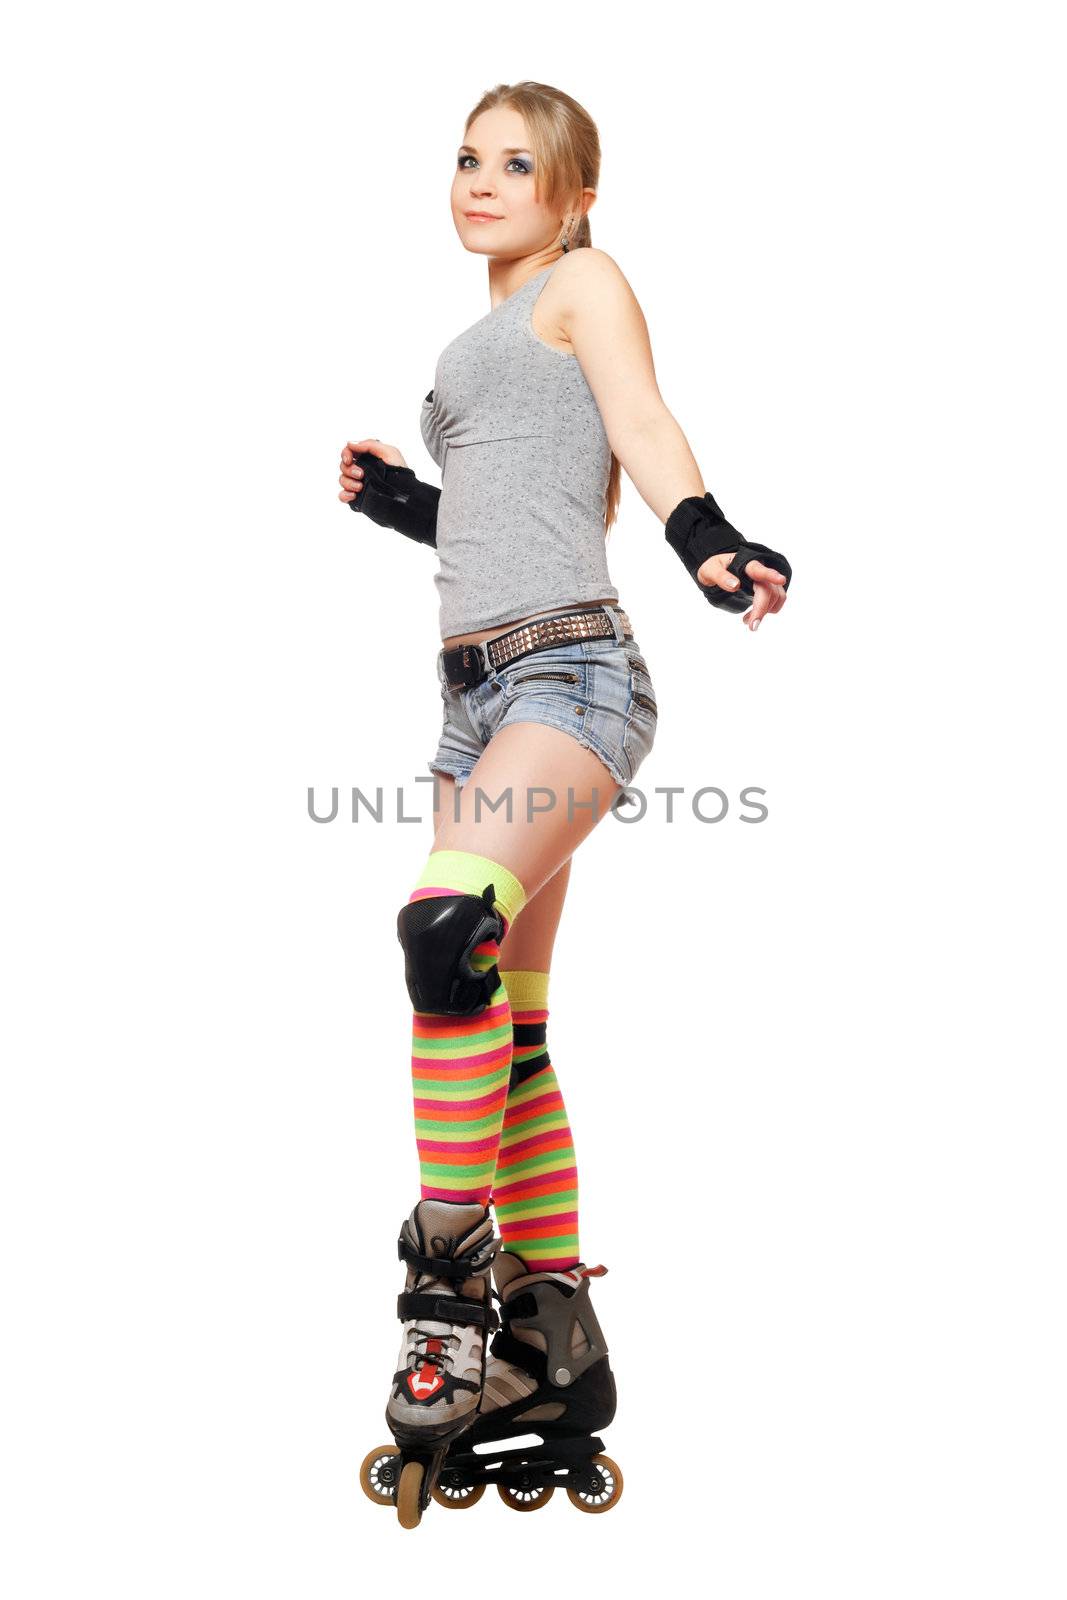 Attractive young blonde on roller skates. Isolated